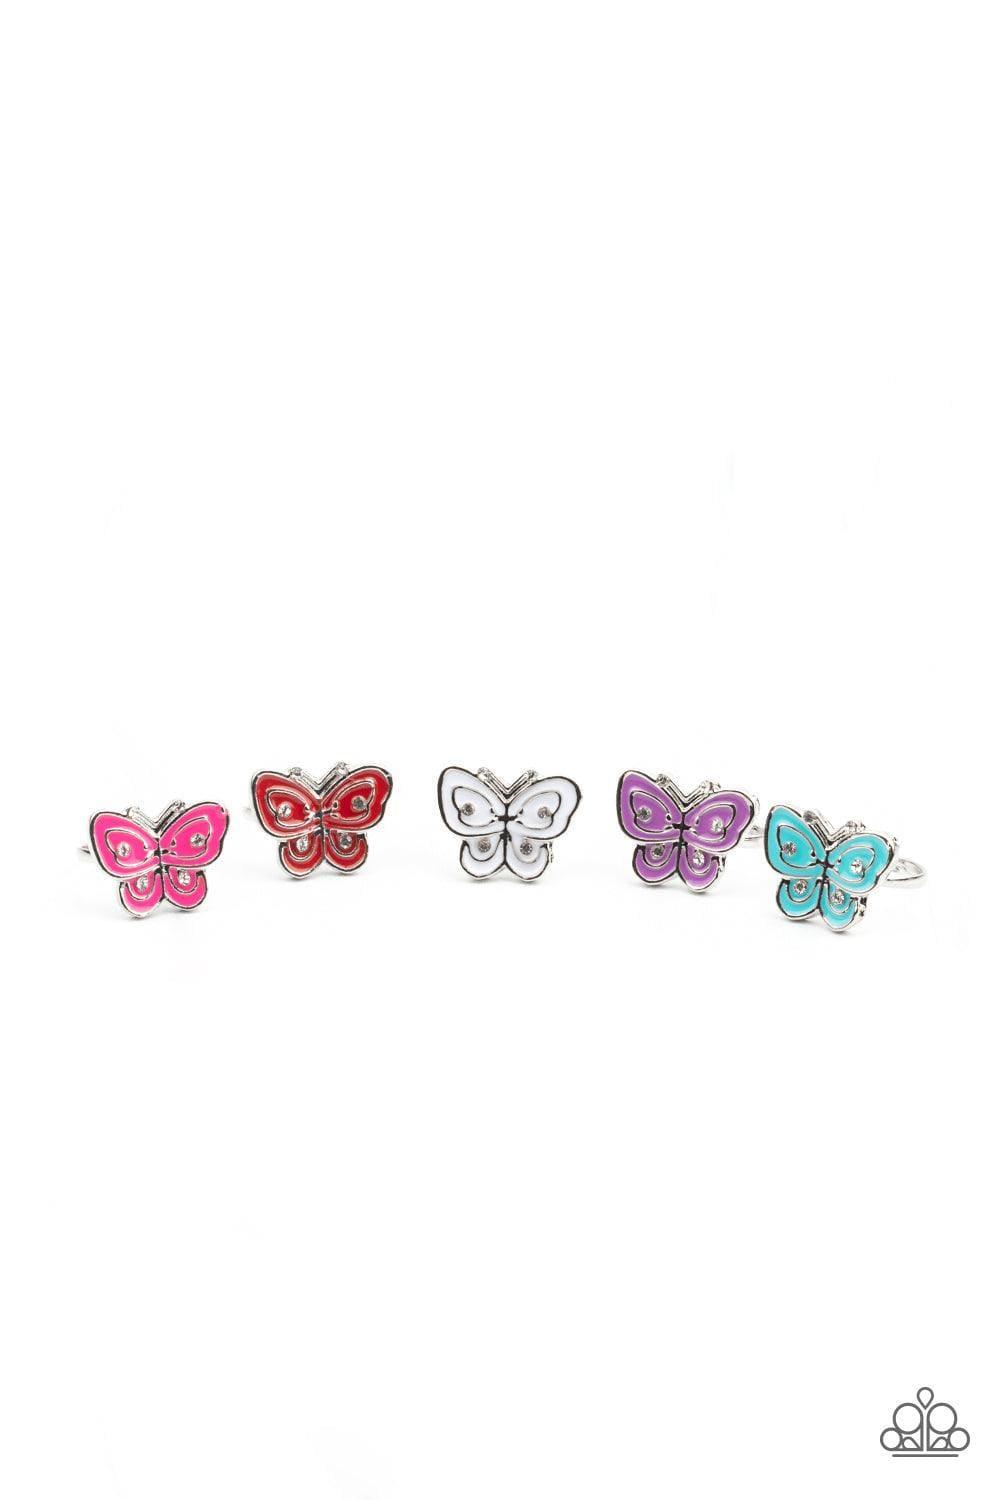 Paparazzi Accessories - Paparazzi Starlet Shimmer Jewelry - Butterfly Rings - Bling by JessieK